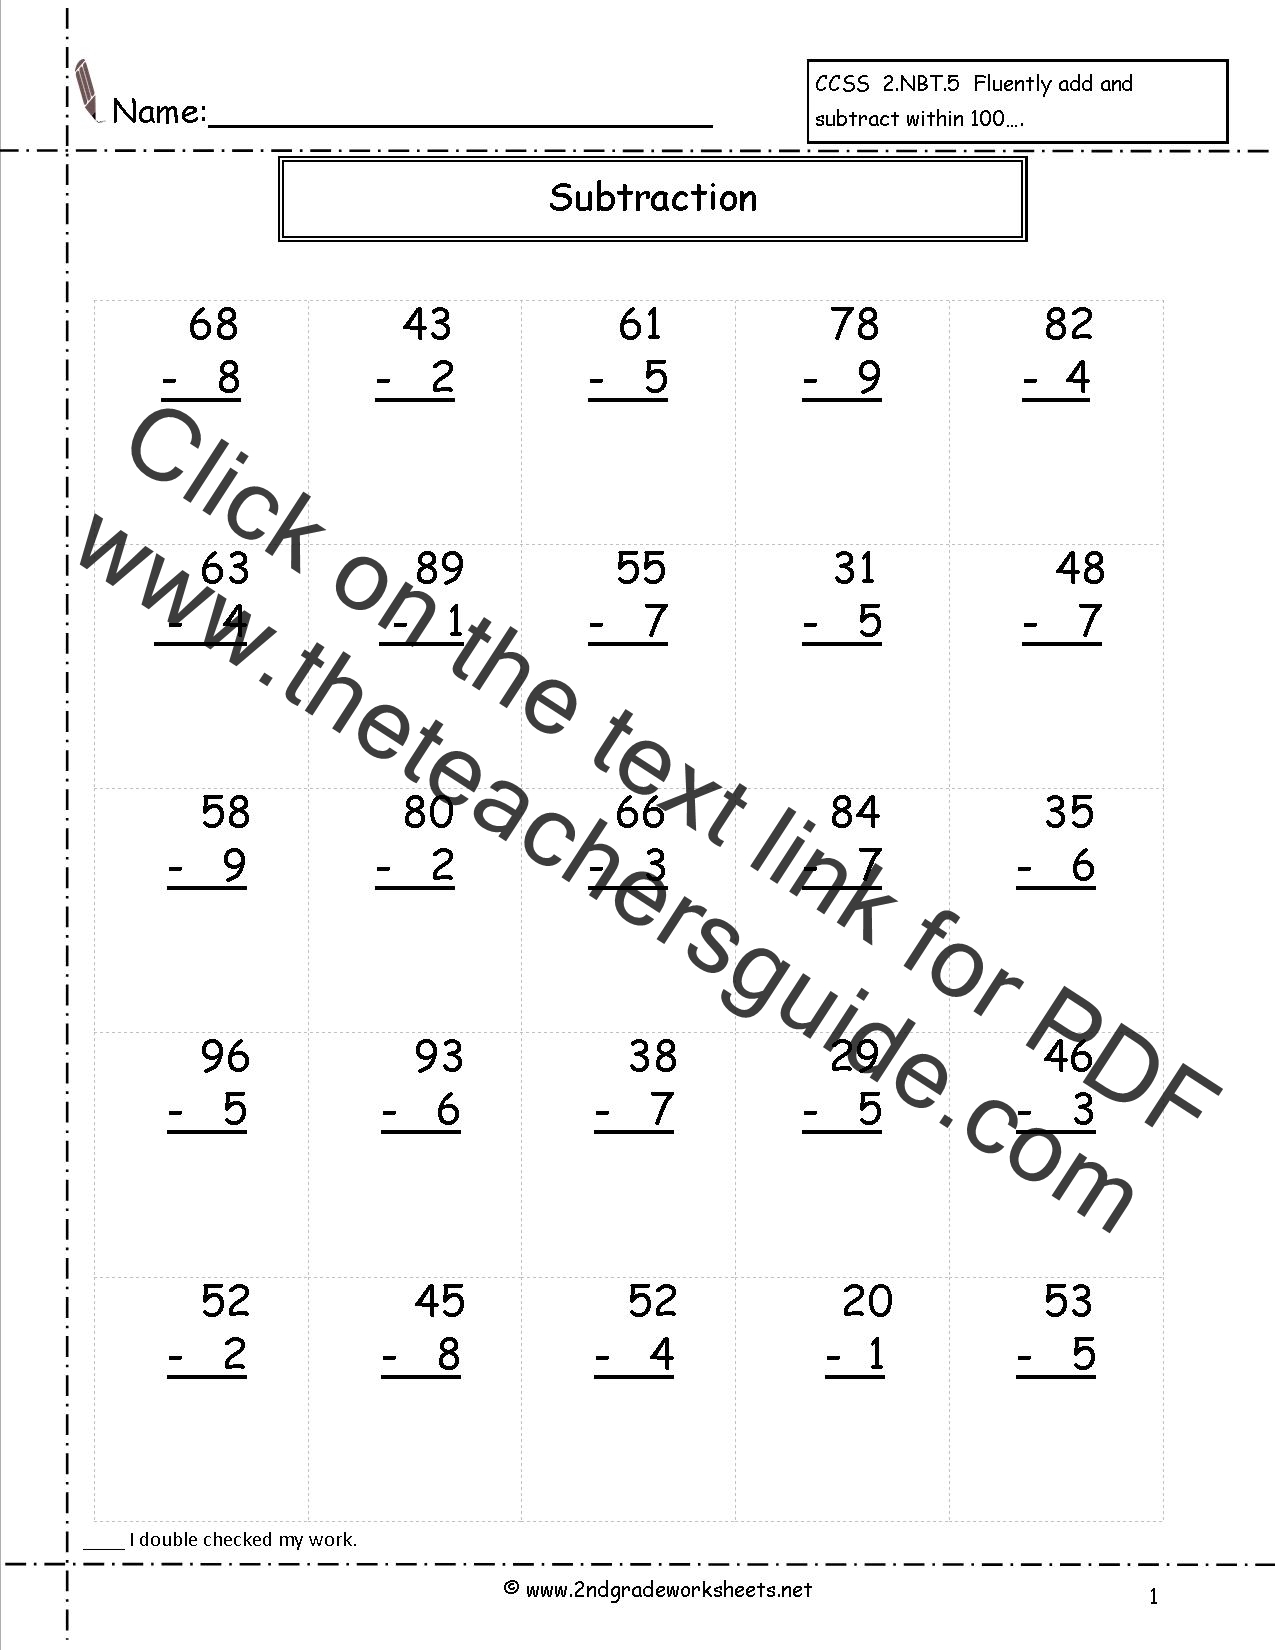 two-digit-subtraction-without-regrouping-worksheet-2nd-grade-math-worksheets-2nd-grade-math